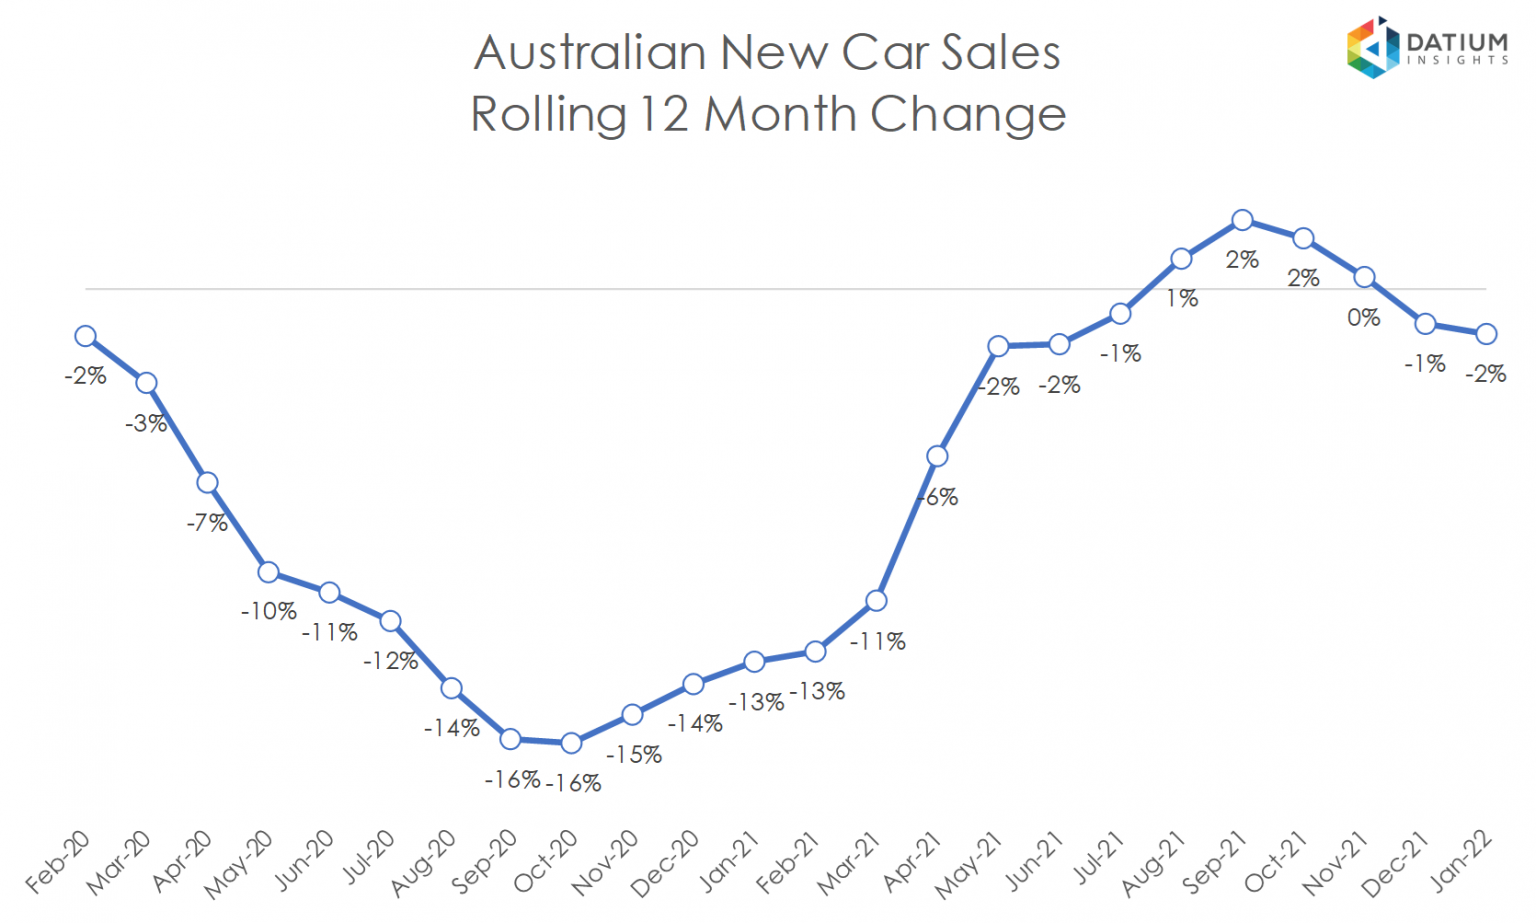 VFACTS New Car Sales Insights January 2022 Datium Insights